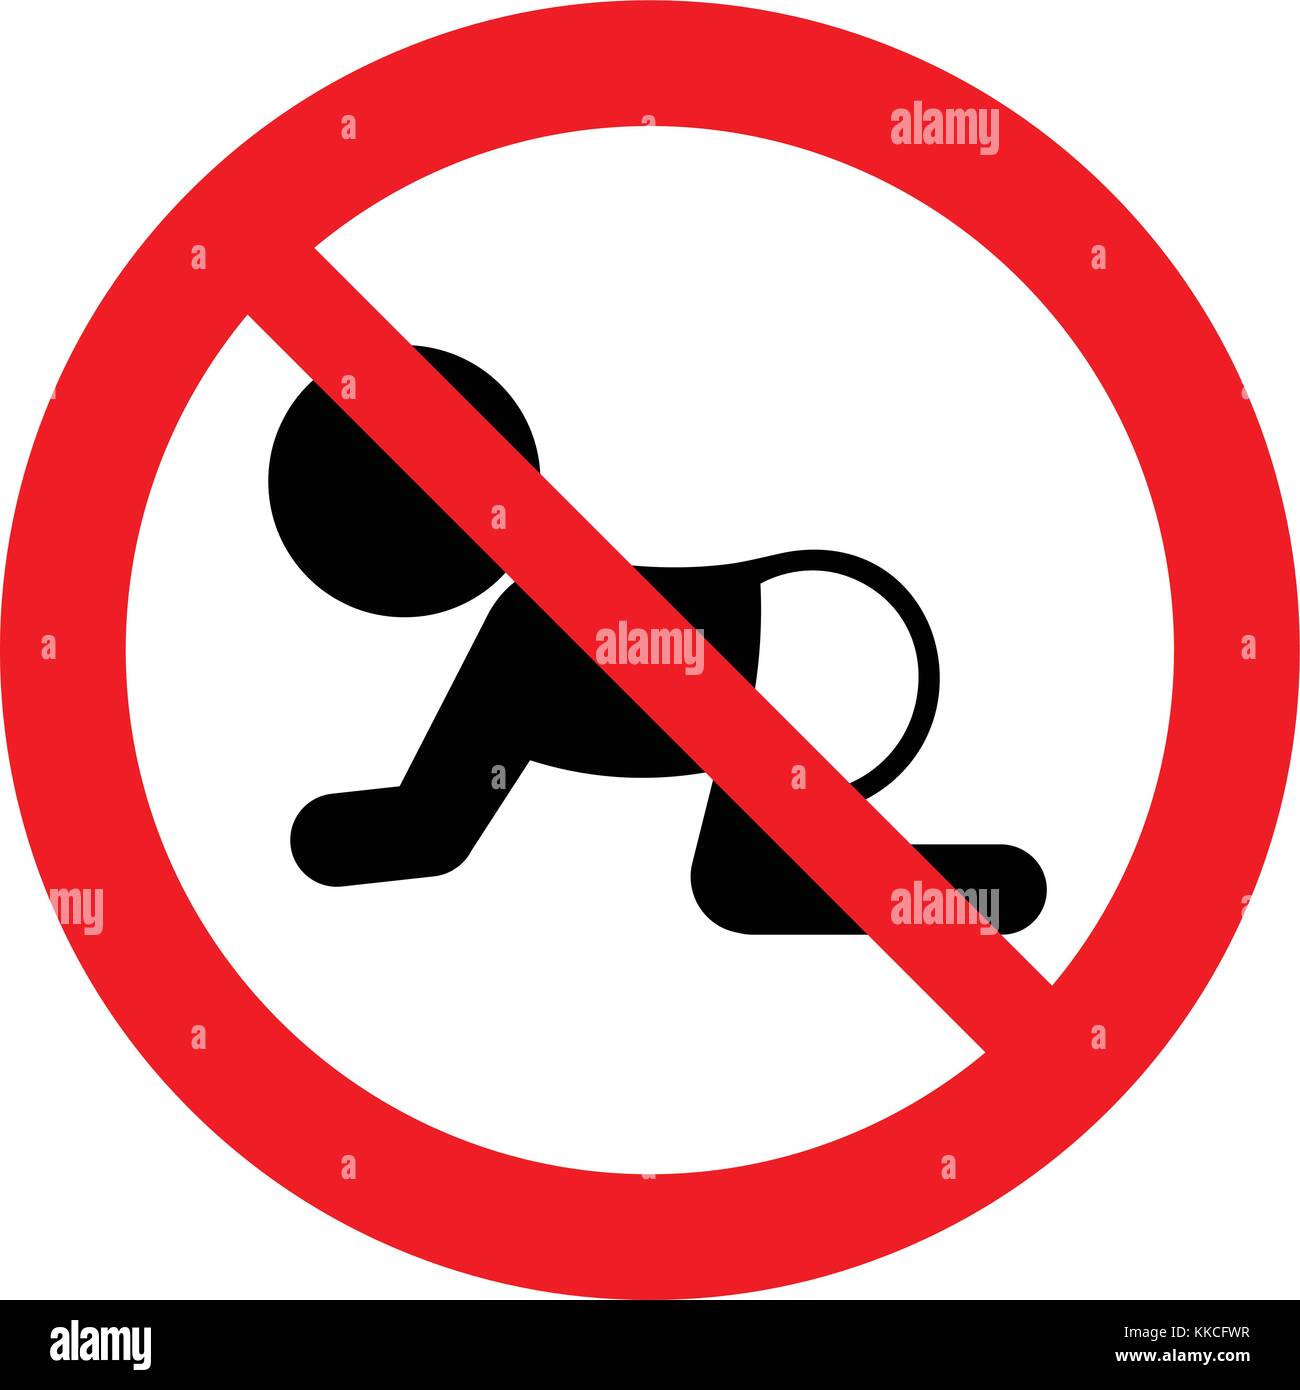 Not suitable for babies, not for baby, prohibition sign, vector illustration. Stock Vector